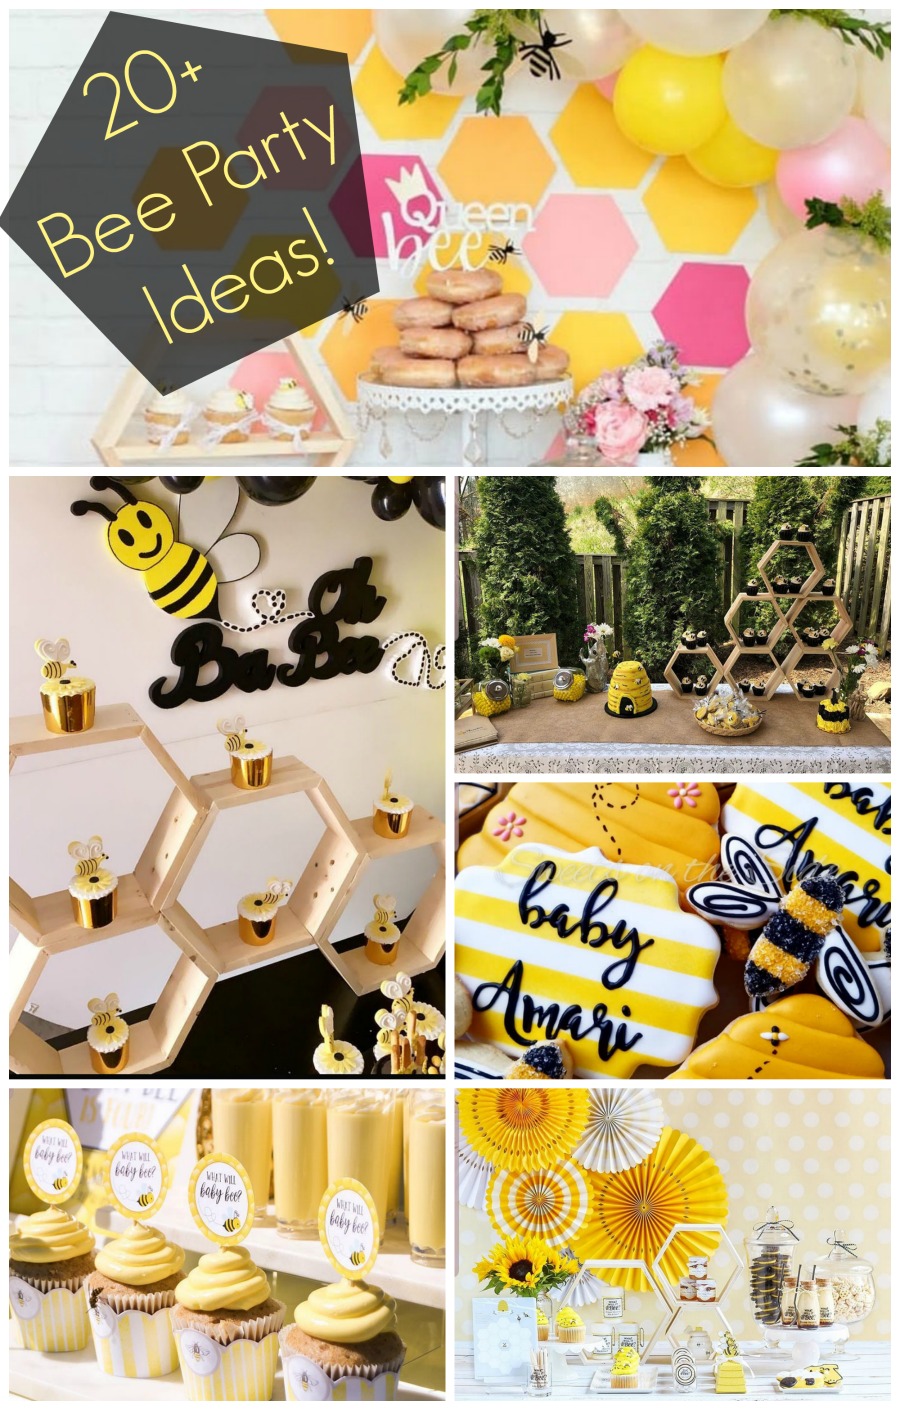 20+ Bee Party Ideas That We Love! - B. Lovely Events